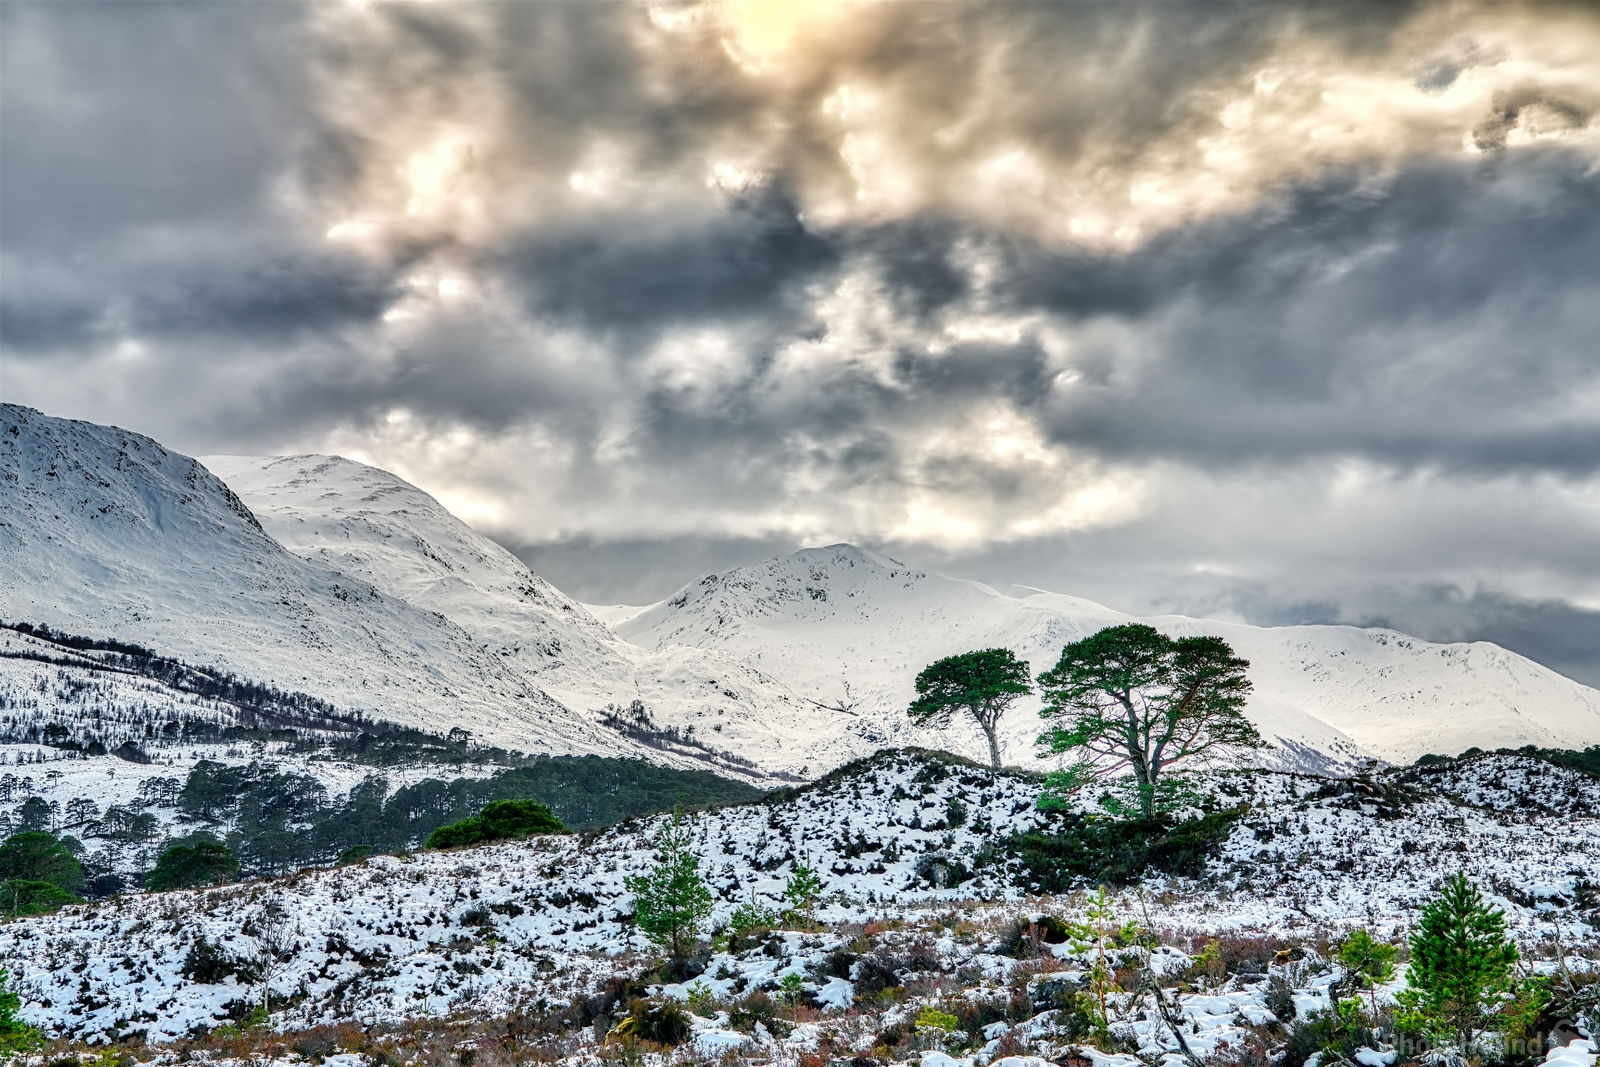 Image of Loch Affric by Peter Zalabai